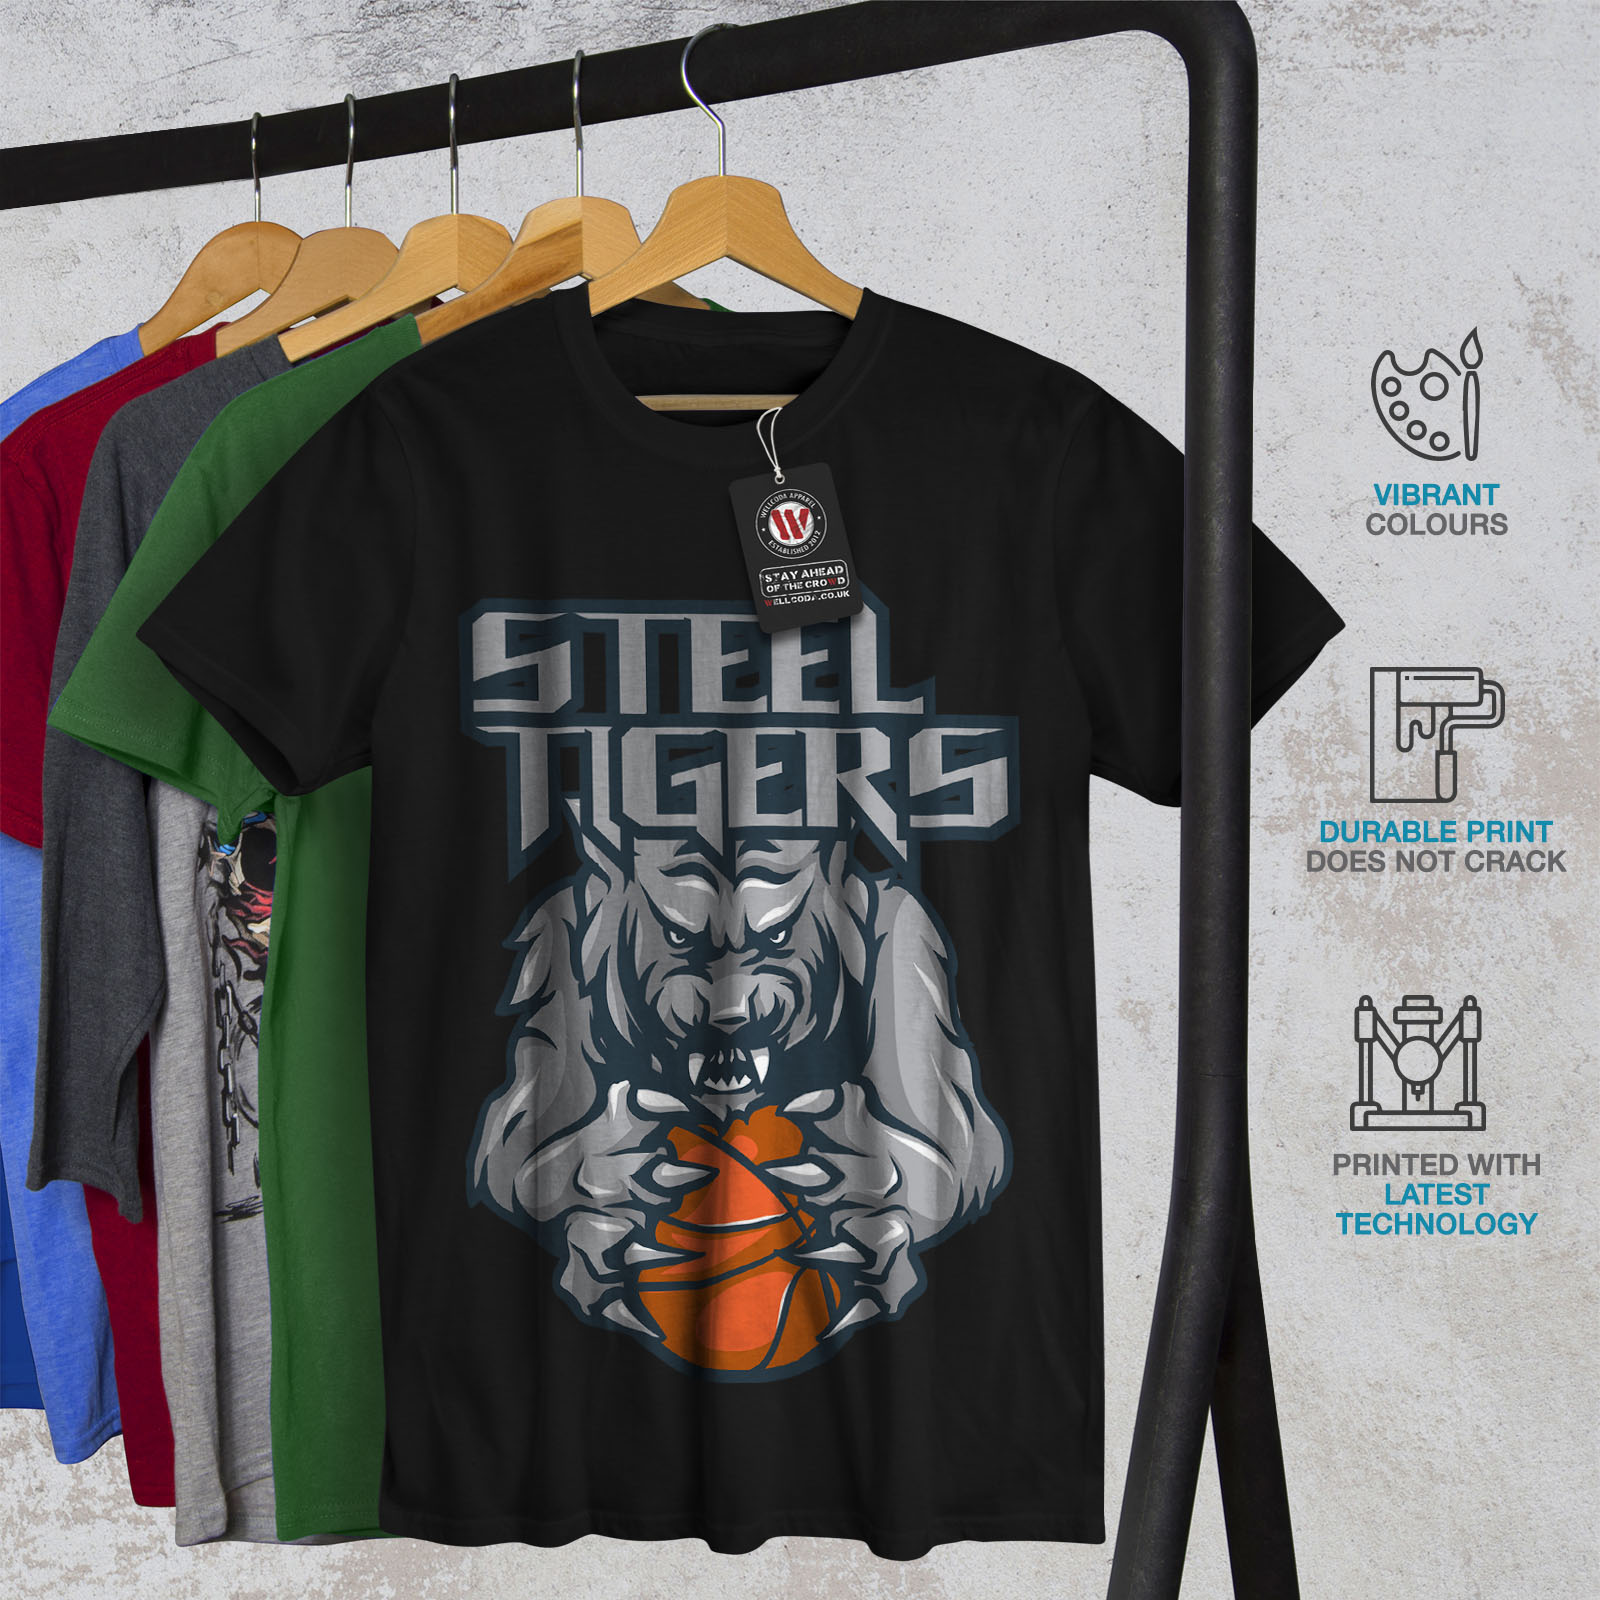 Details about   Wellcoda Tiger Basketball Mens T-shirt Basketball Graphic Design Printed Tee